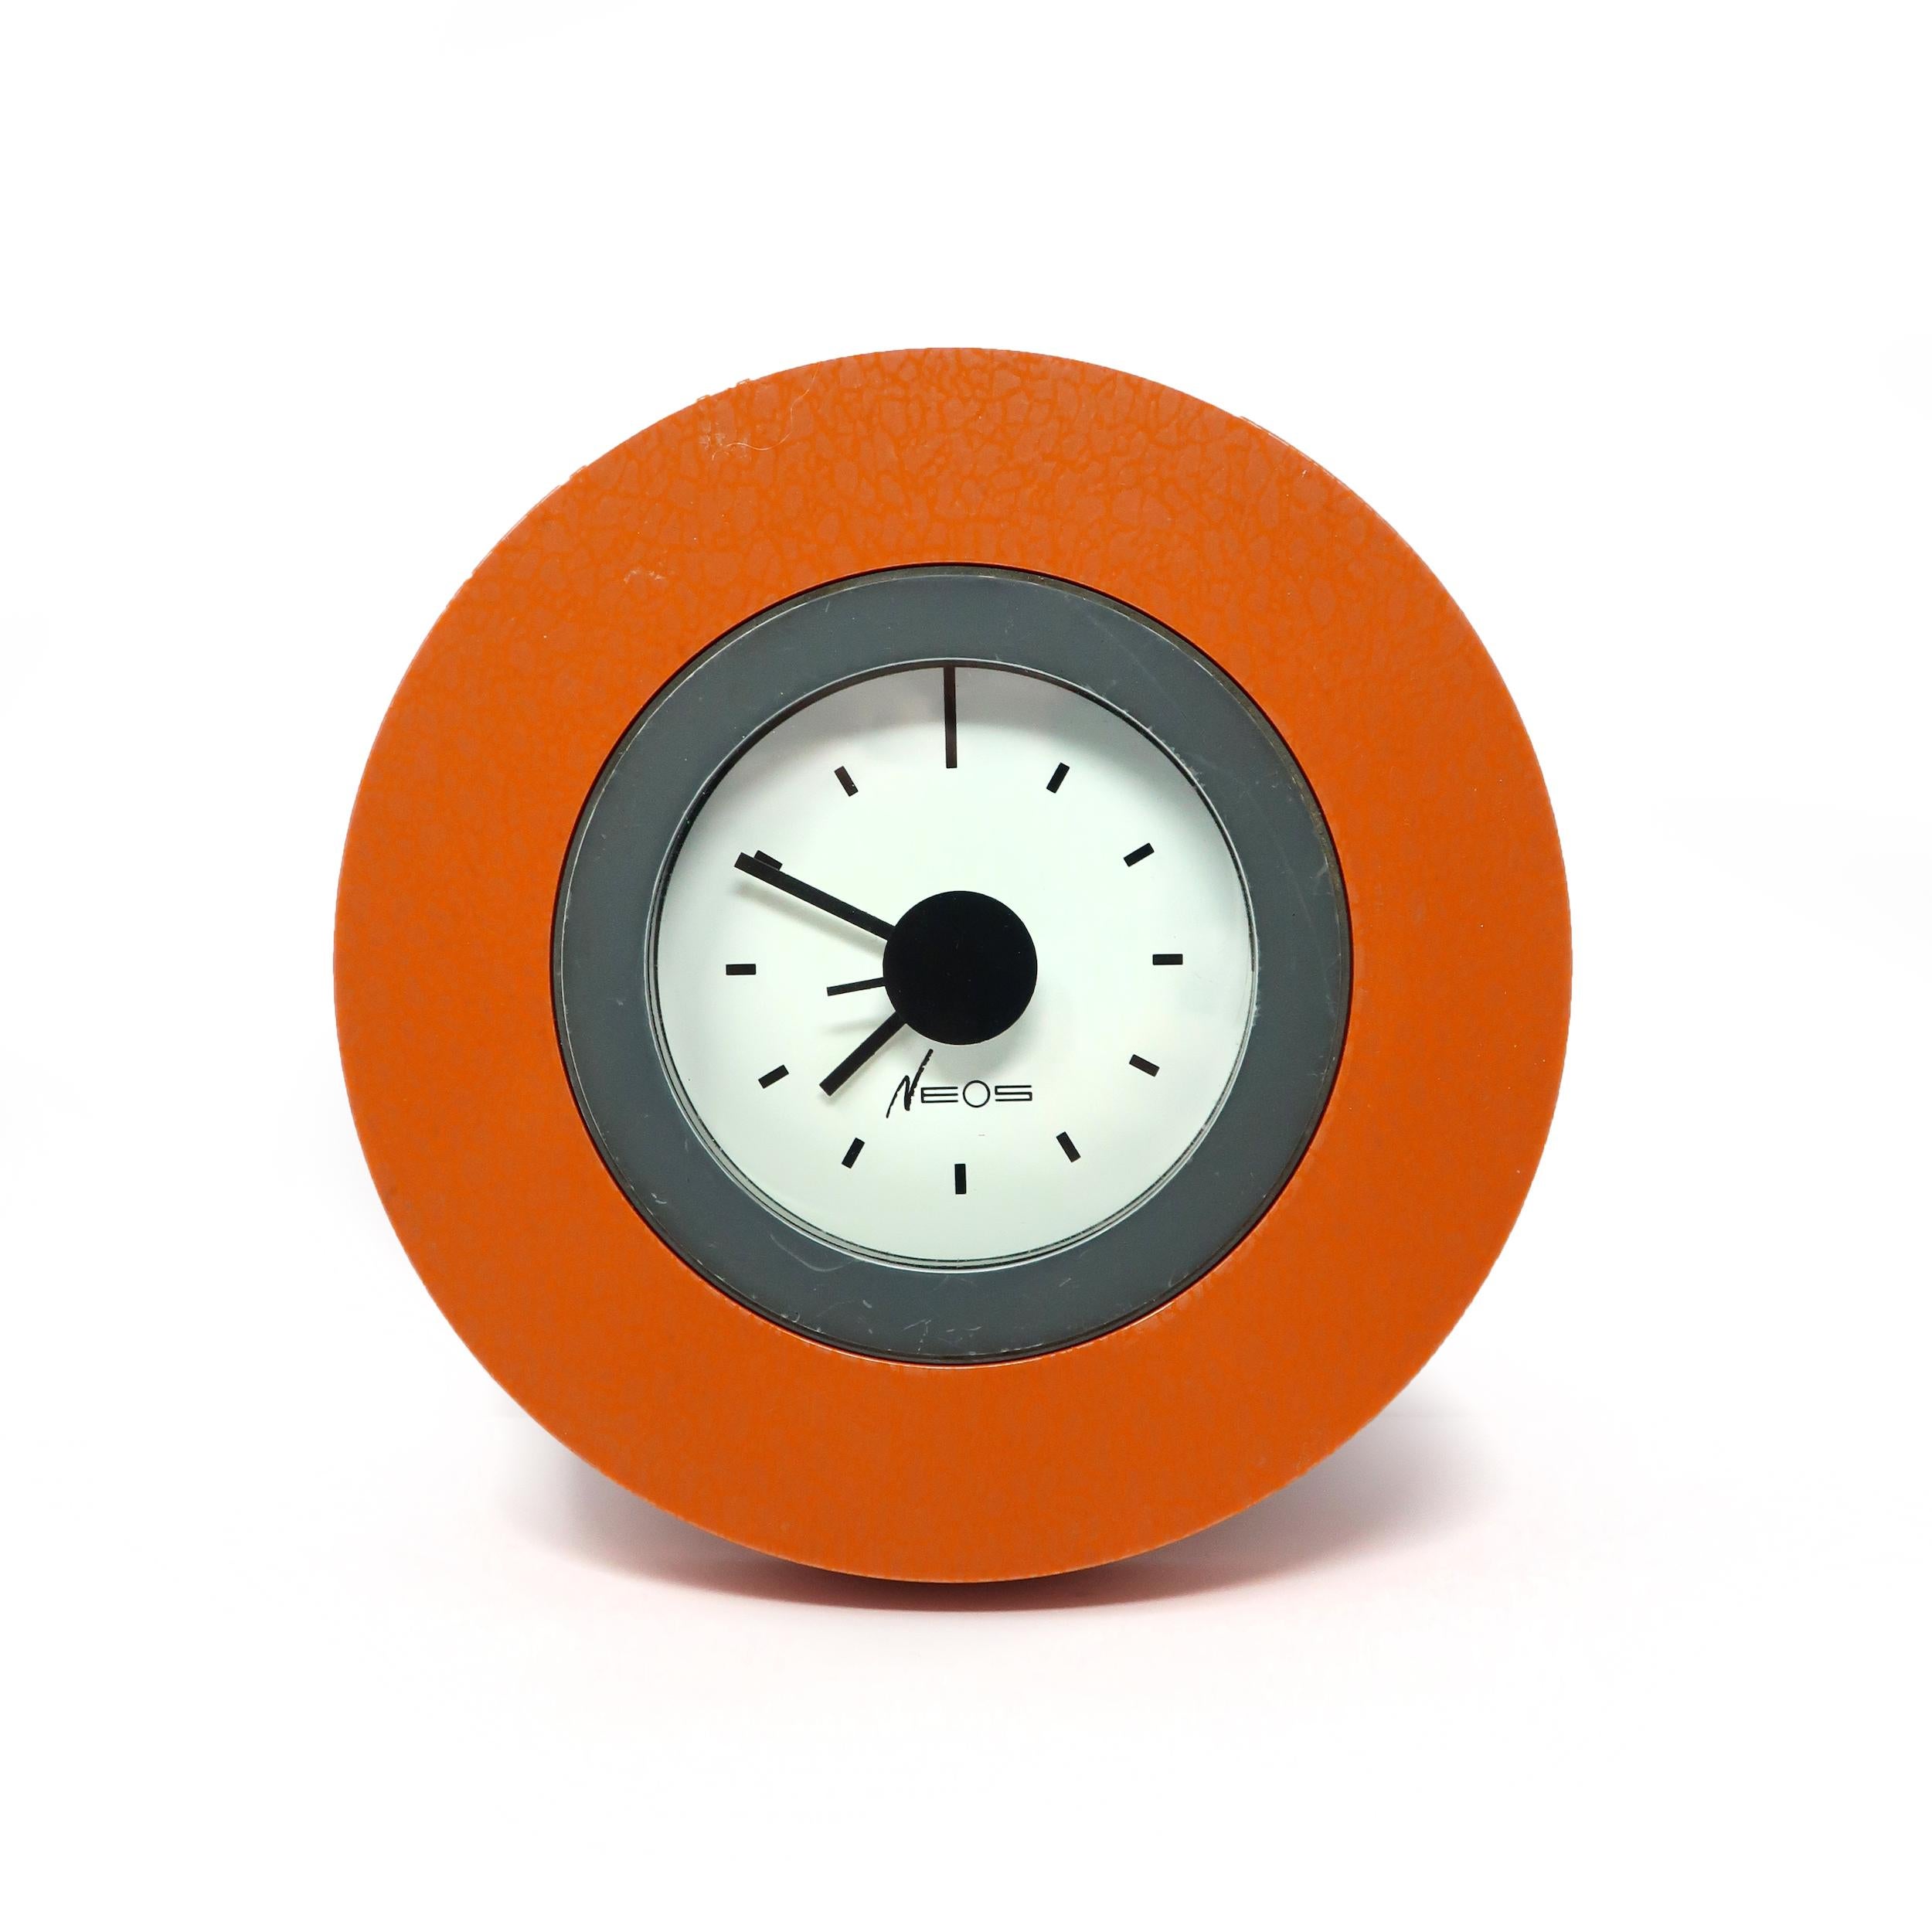 An amazing orange and gray wall clock designed by Memphis Group founding members George Sowden and Nathalie du Pasquier for Neos of Lorenz.  Orange plastic case with a very subtle iridescent elephant print, gray inner circle on front, white face